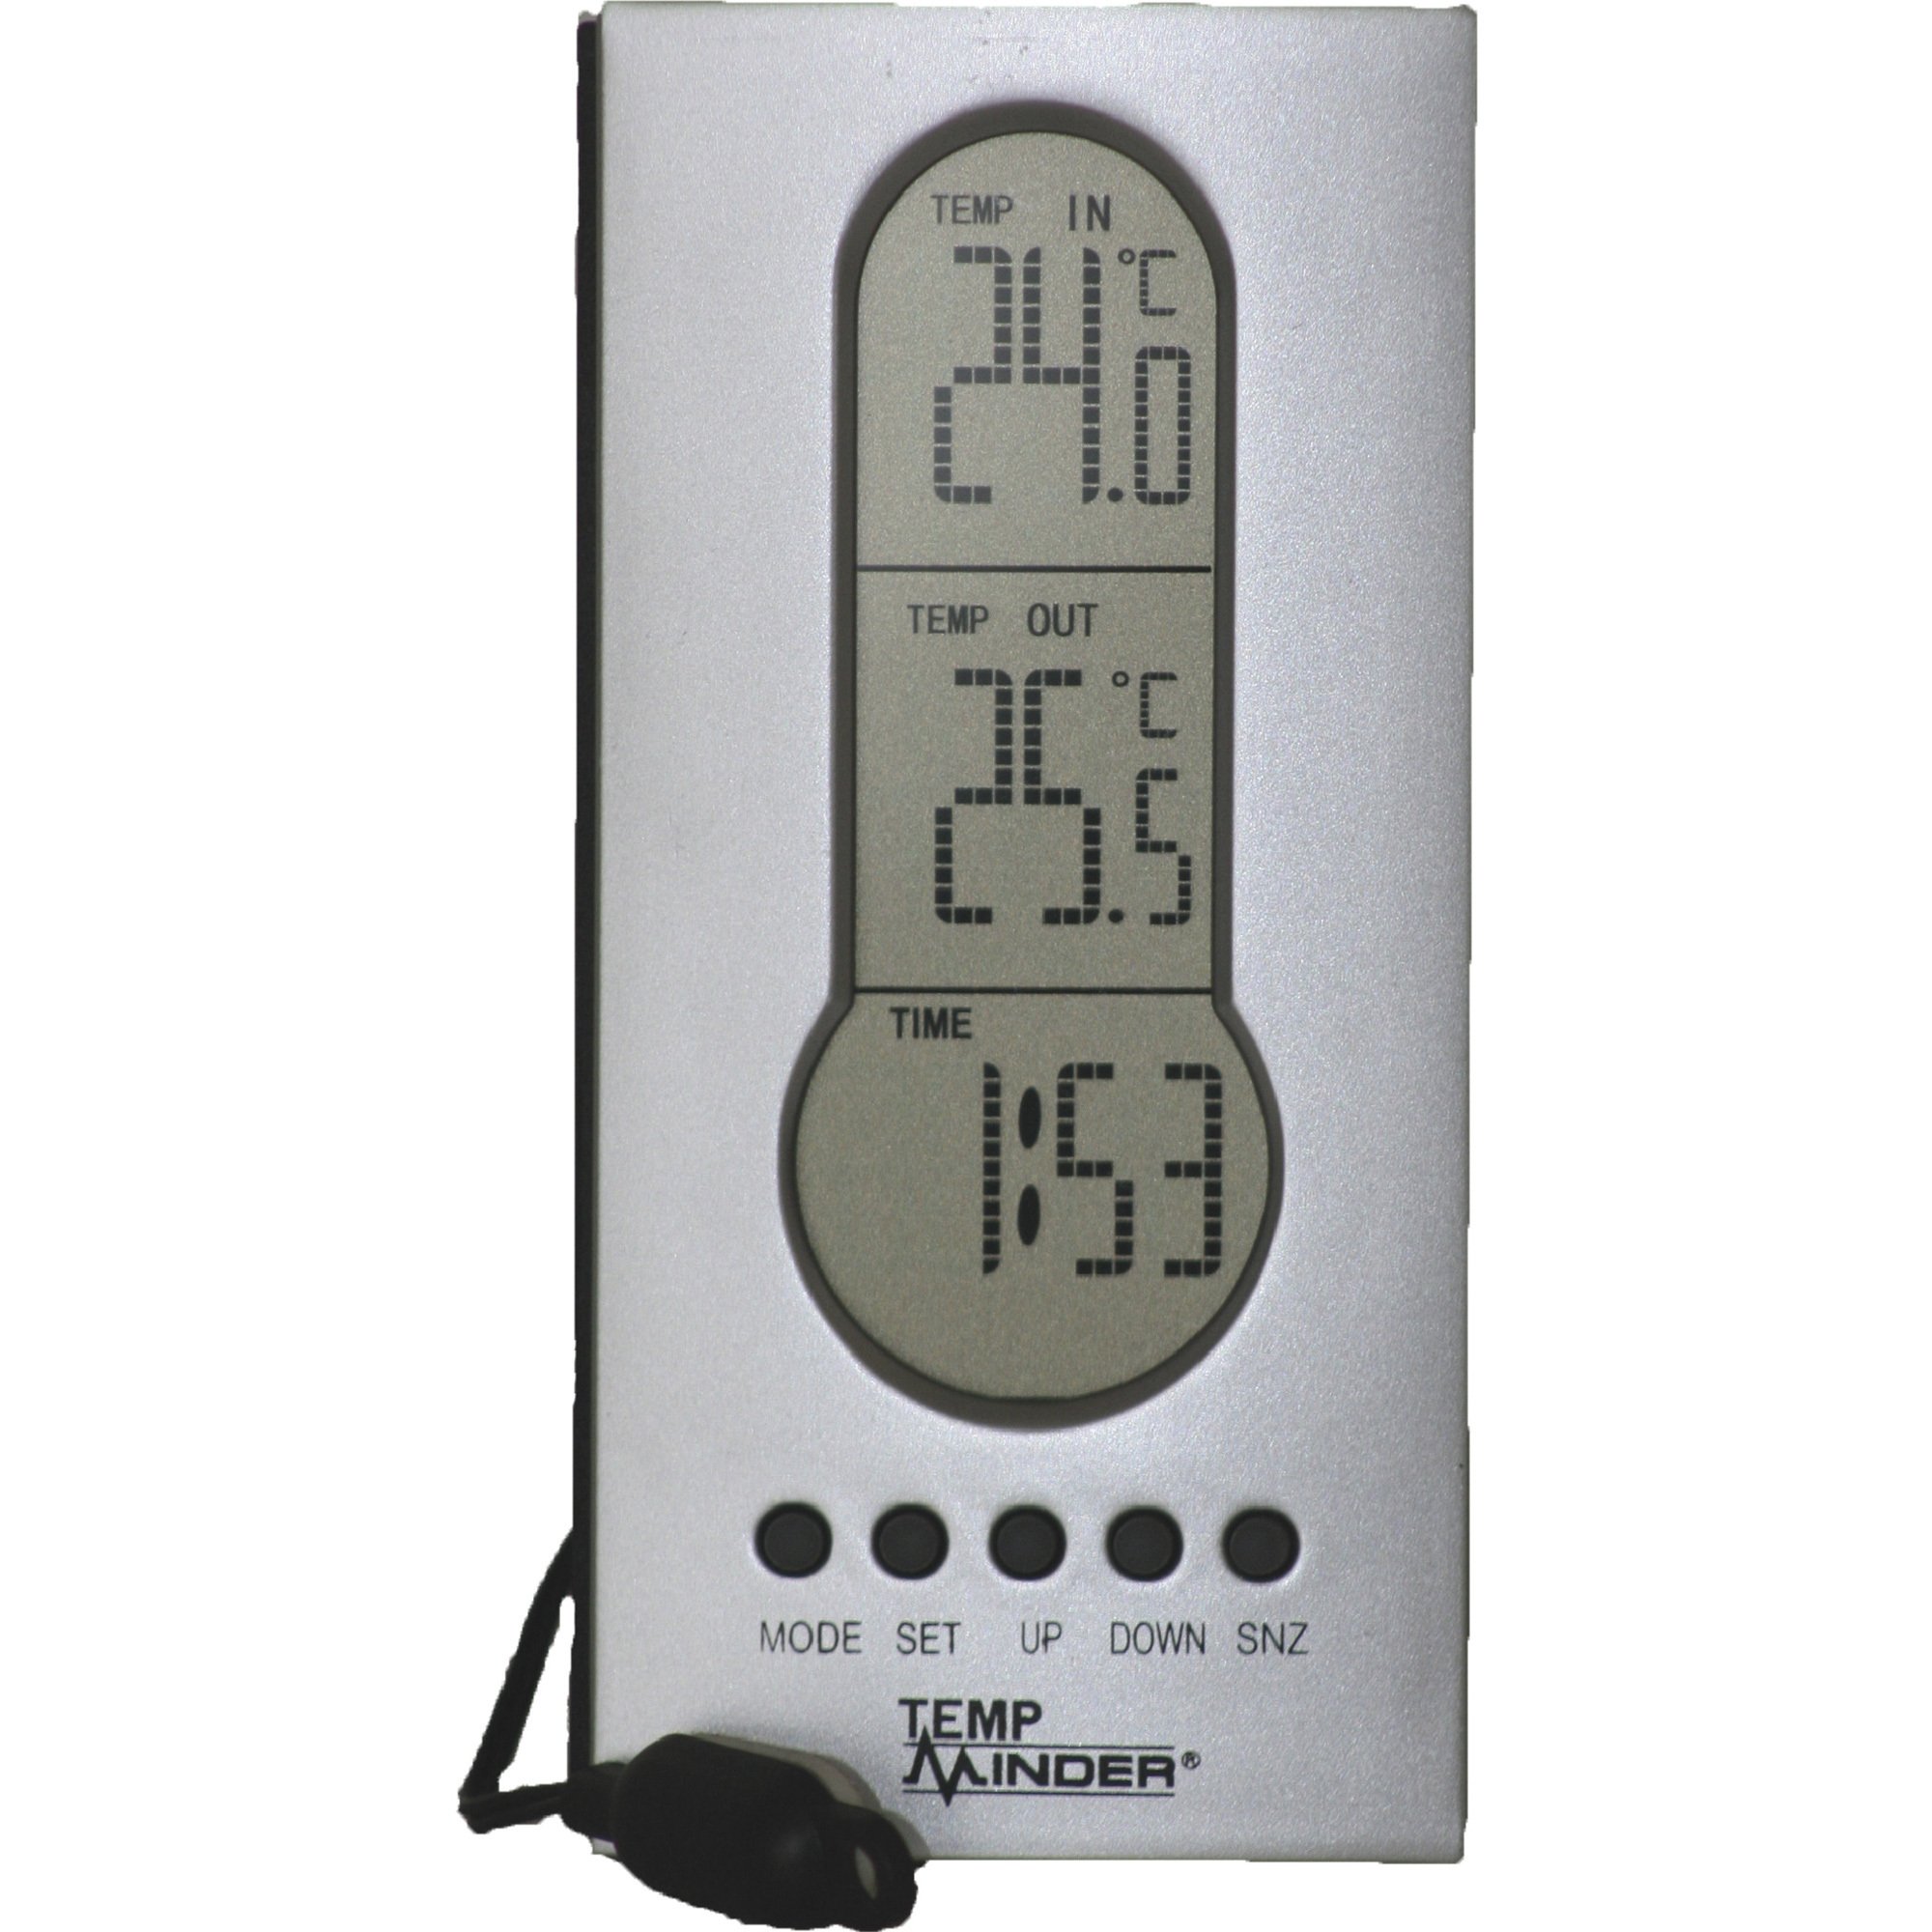 Wired Indoor and Outdoor Thermometer